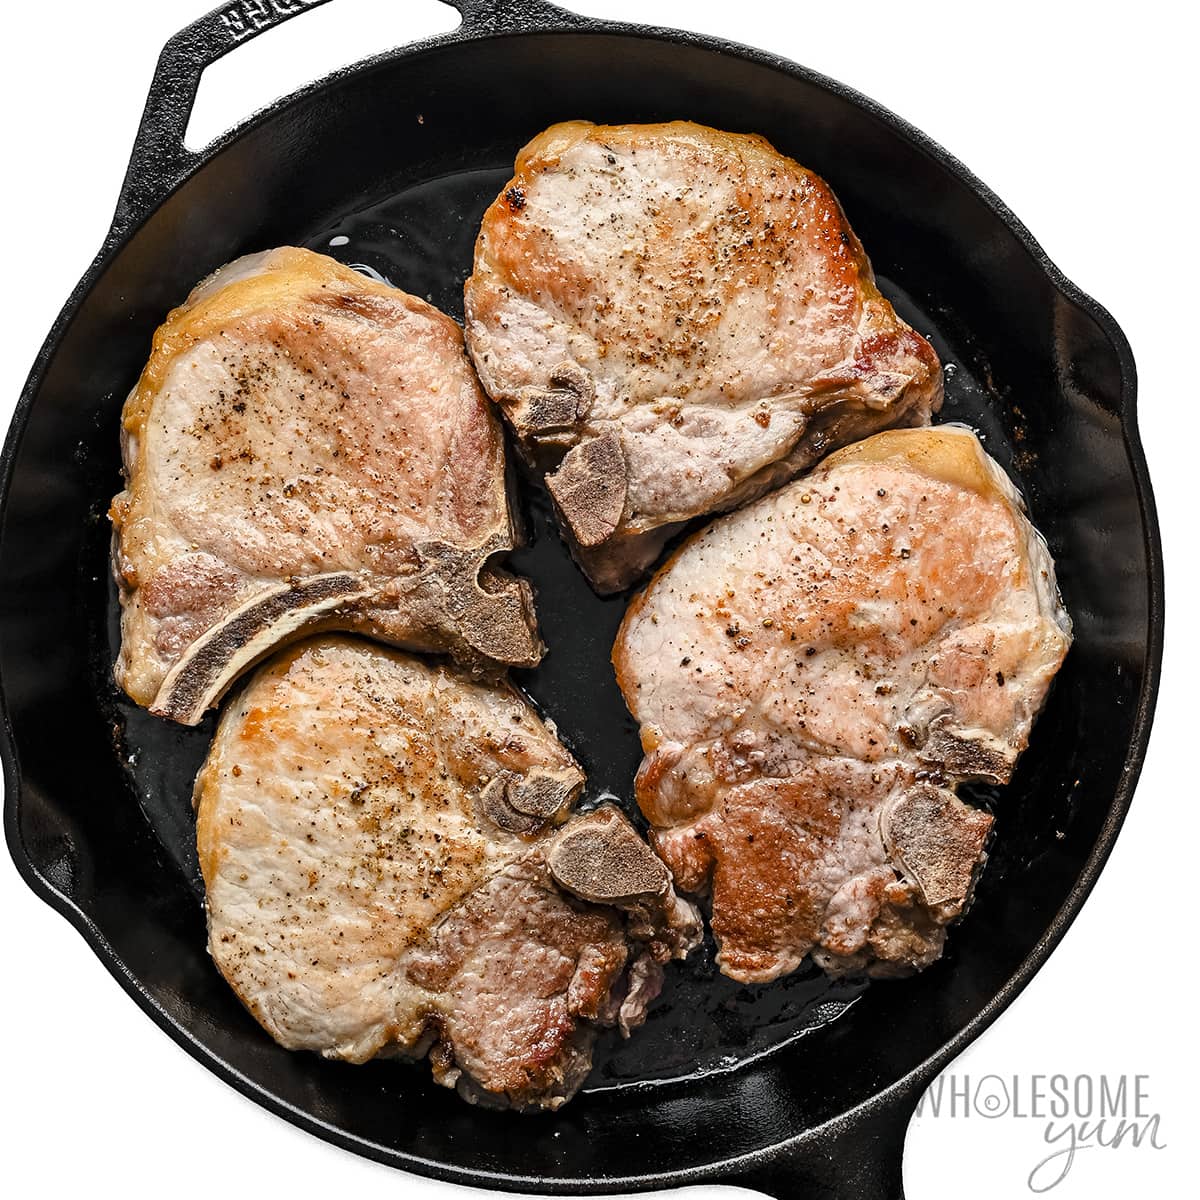 Pork chops seared on both sides in a skillet.